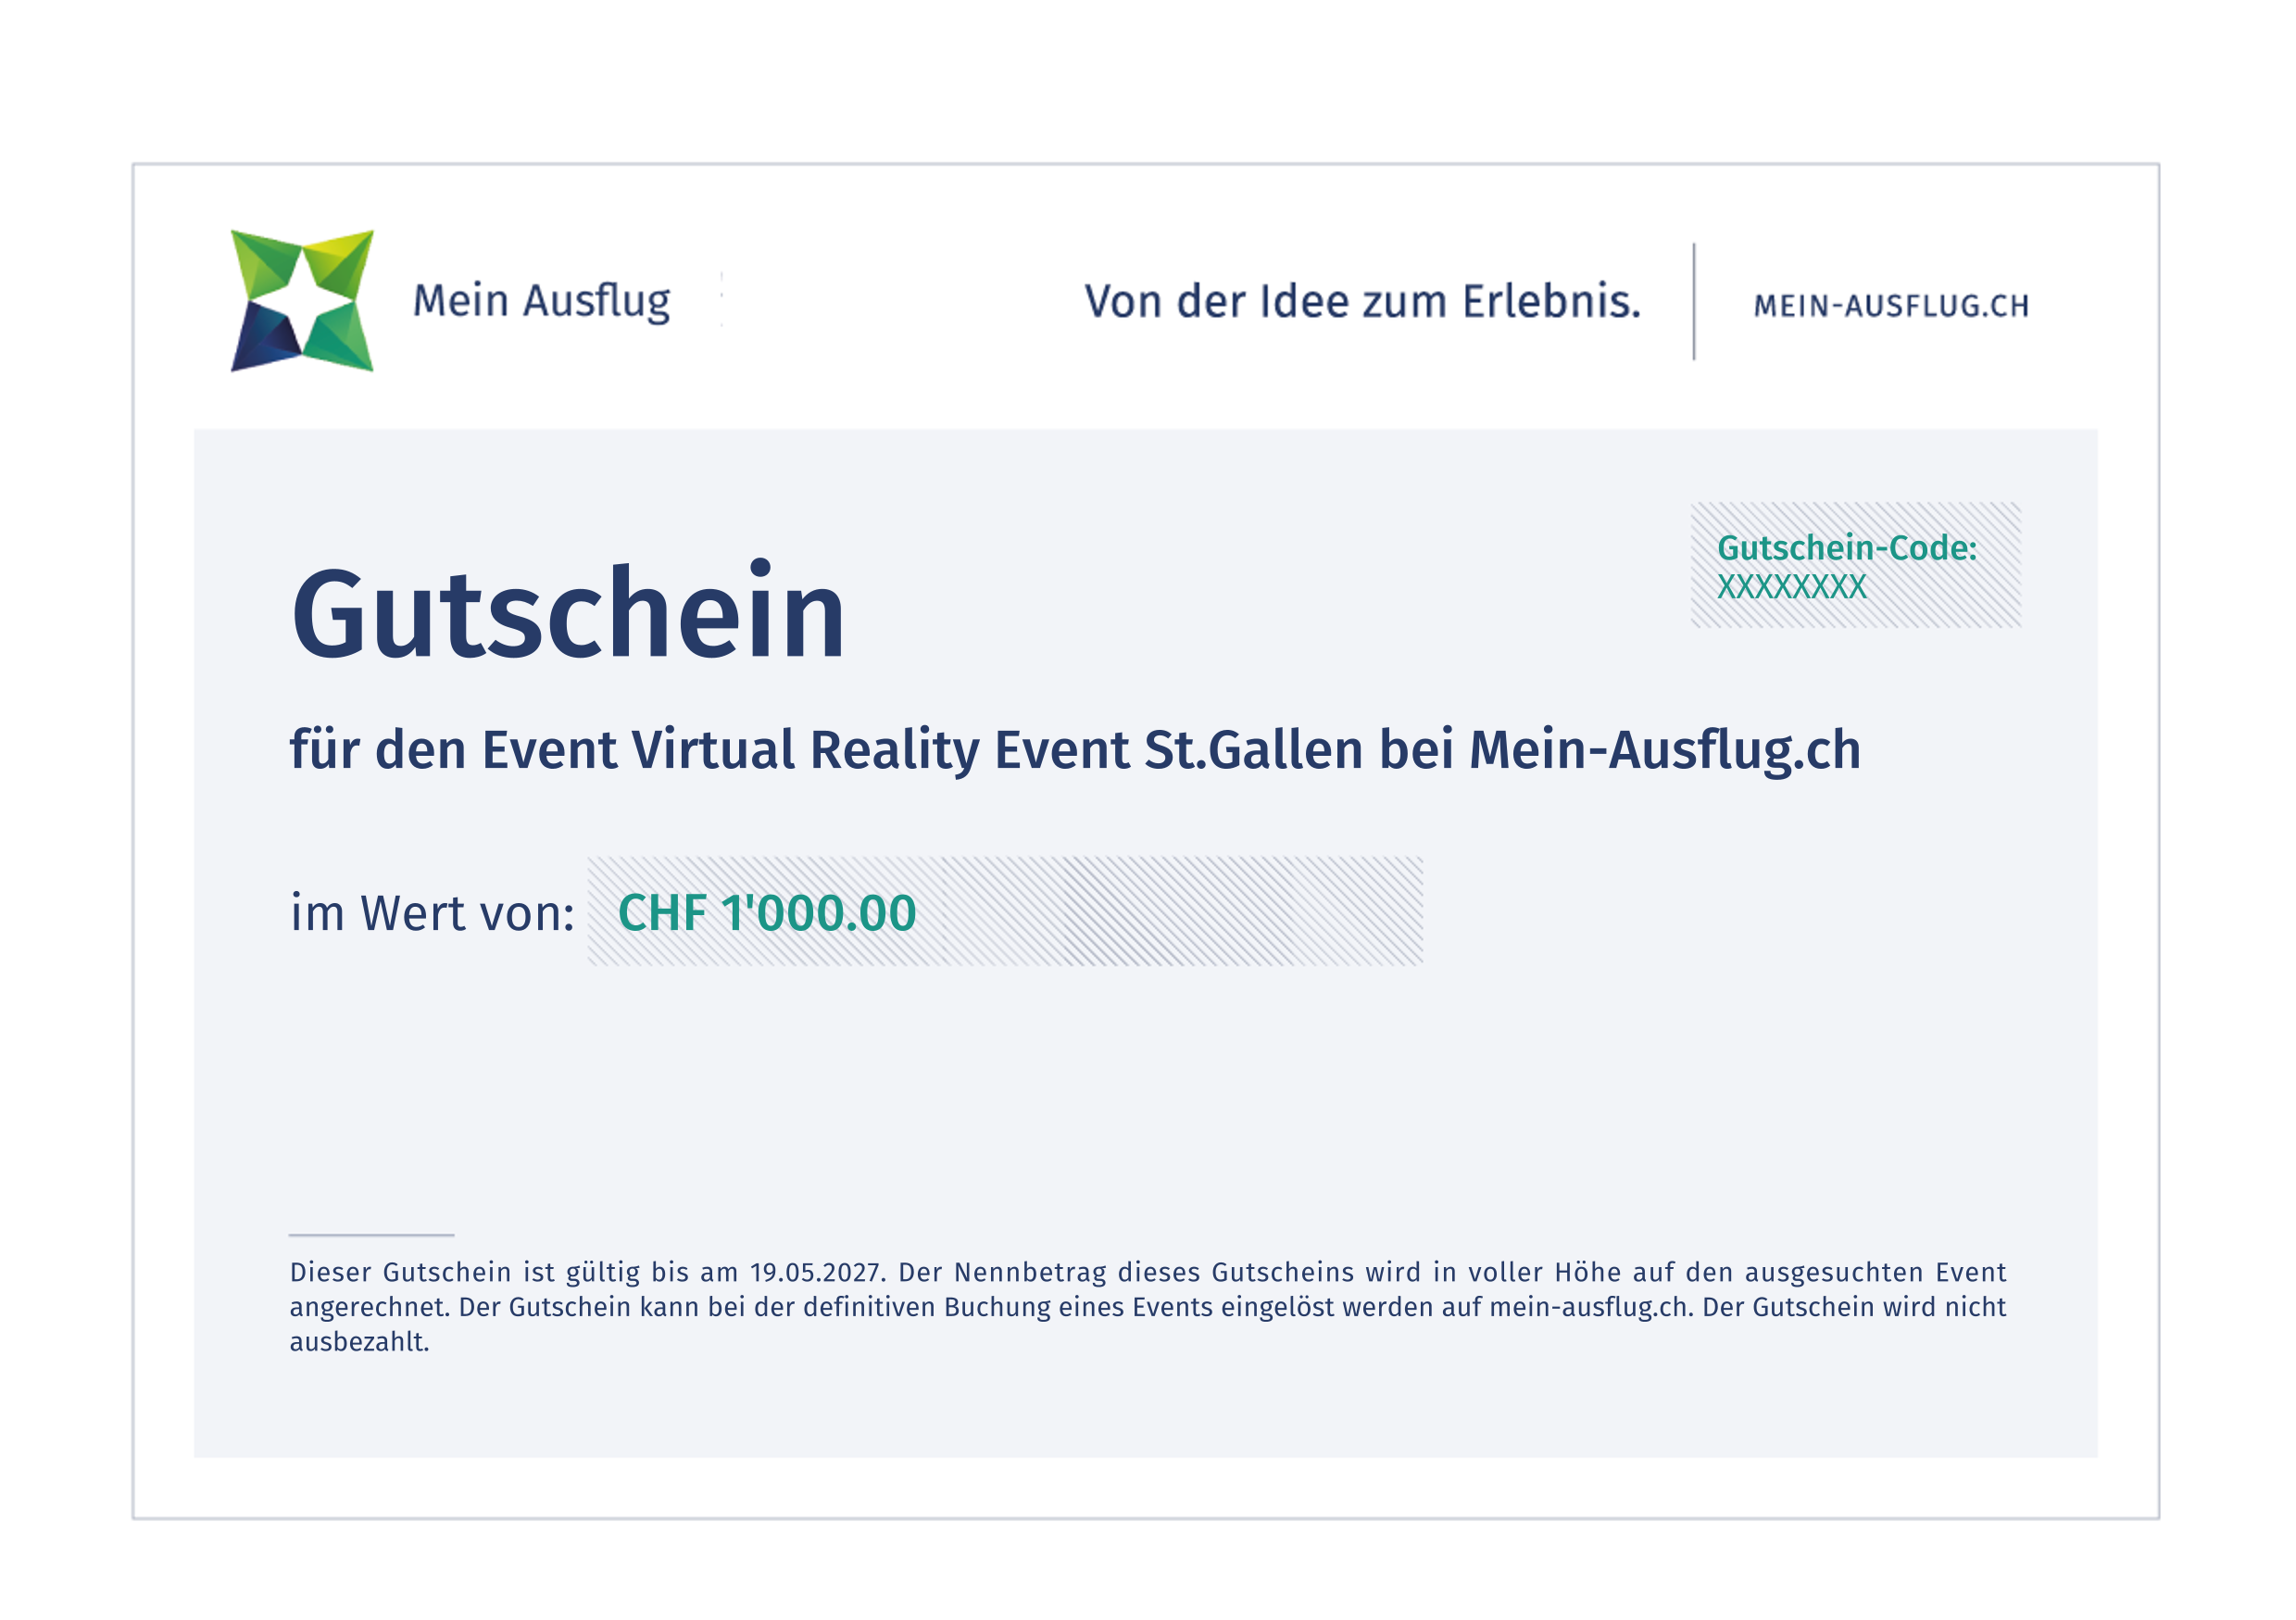 Virtual Reality Event St.Gallen